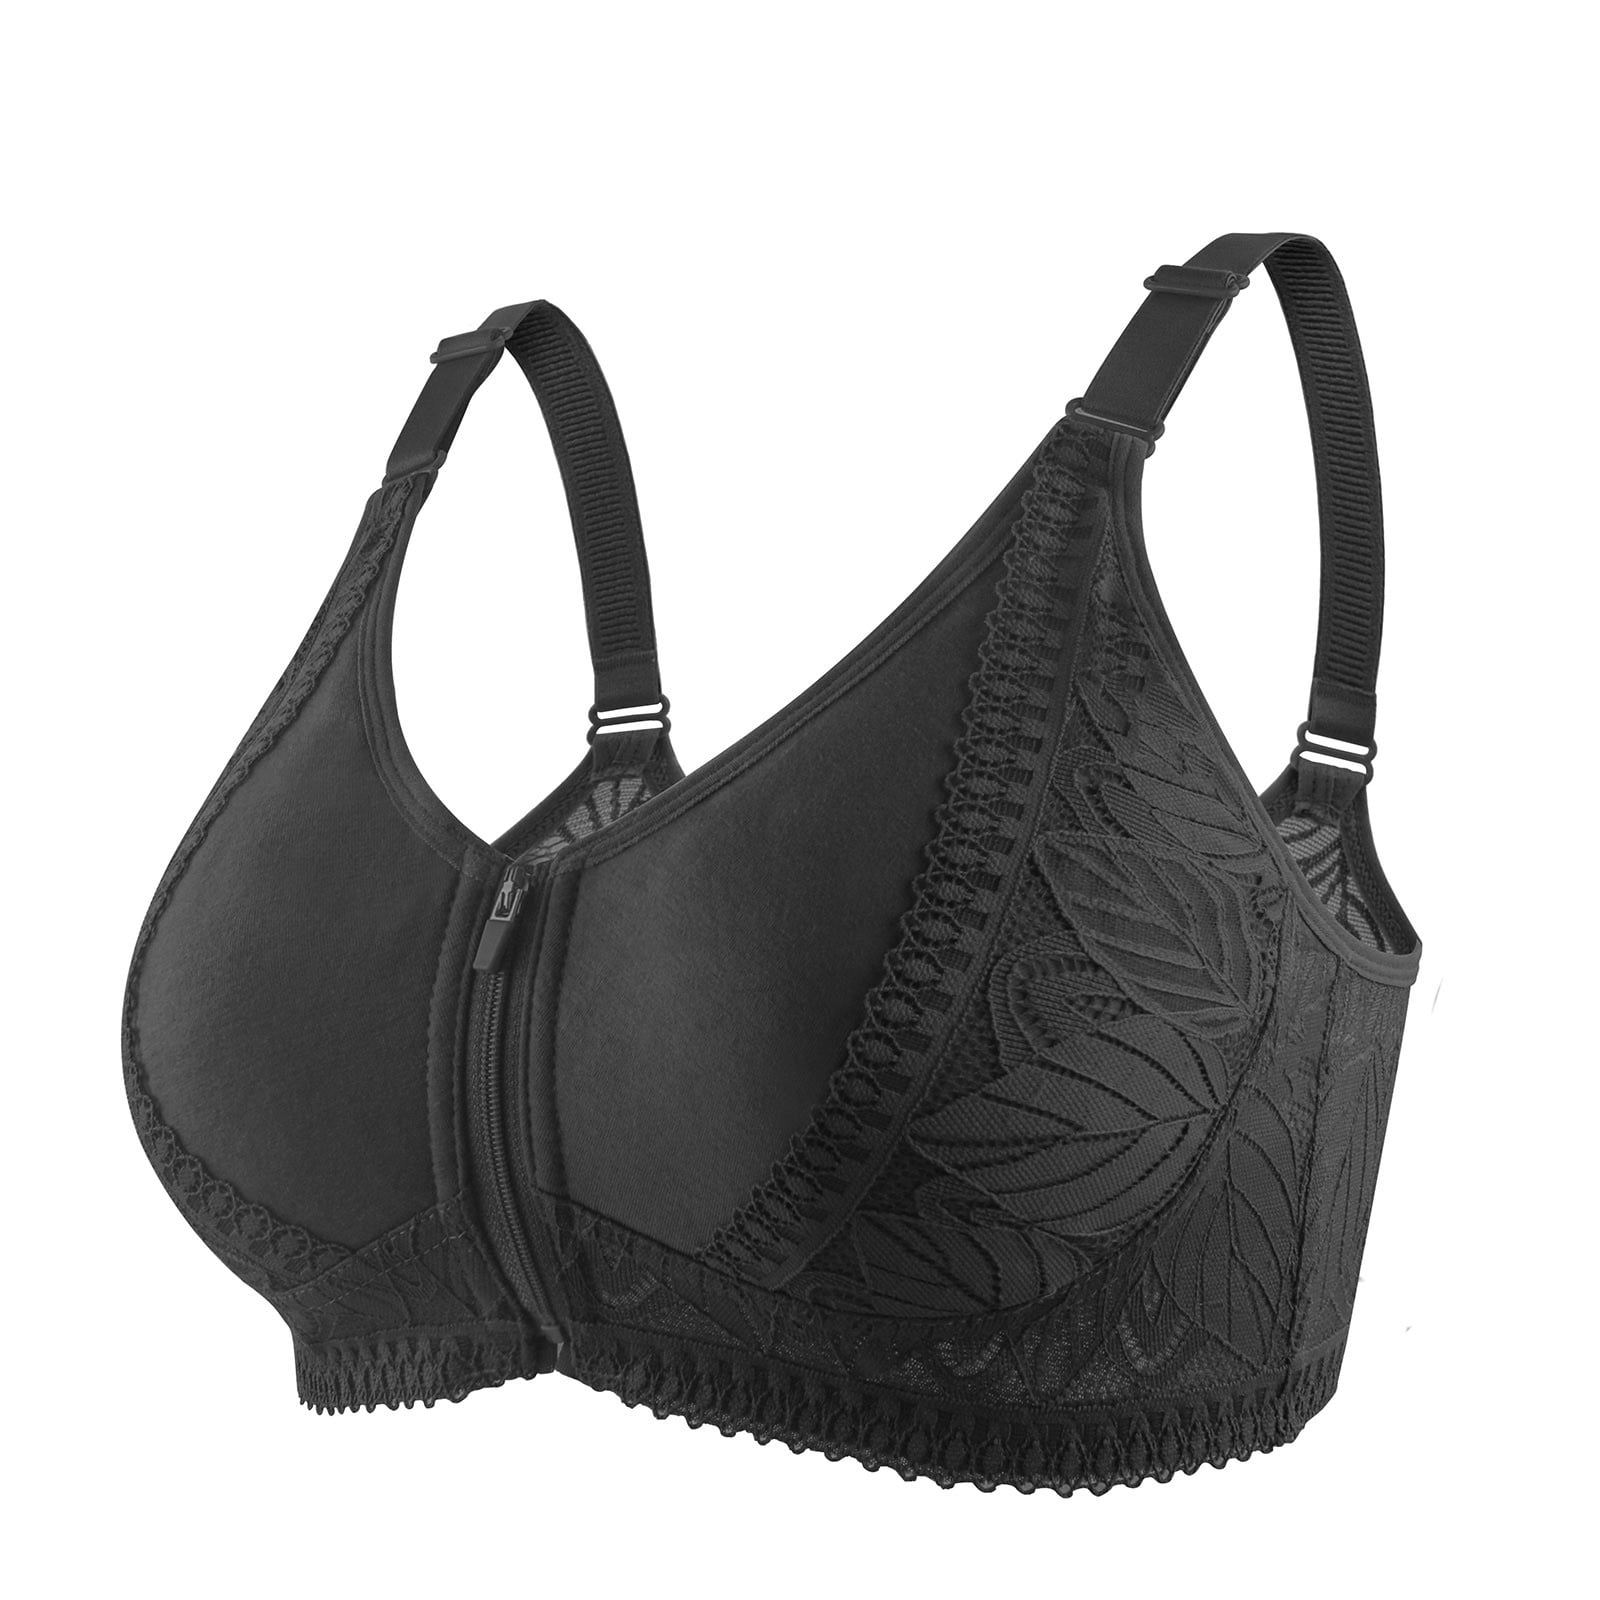 Soma Intimates Soma Black Embraceable Wirefree Bra, 36B Size 36 B - $13  (69% Off Retail) - From Rose